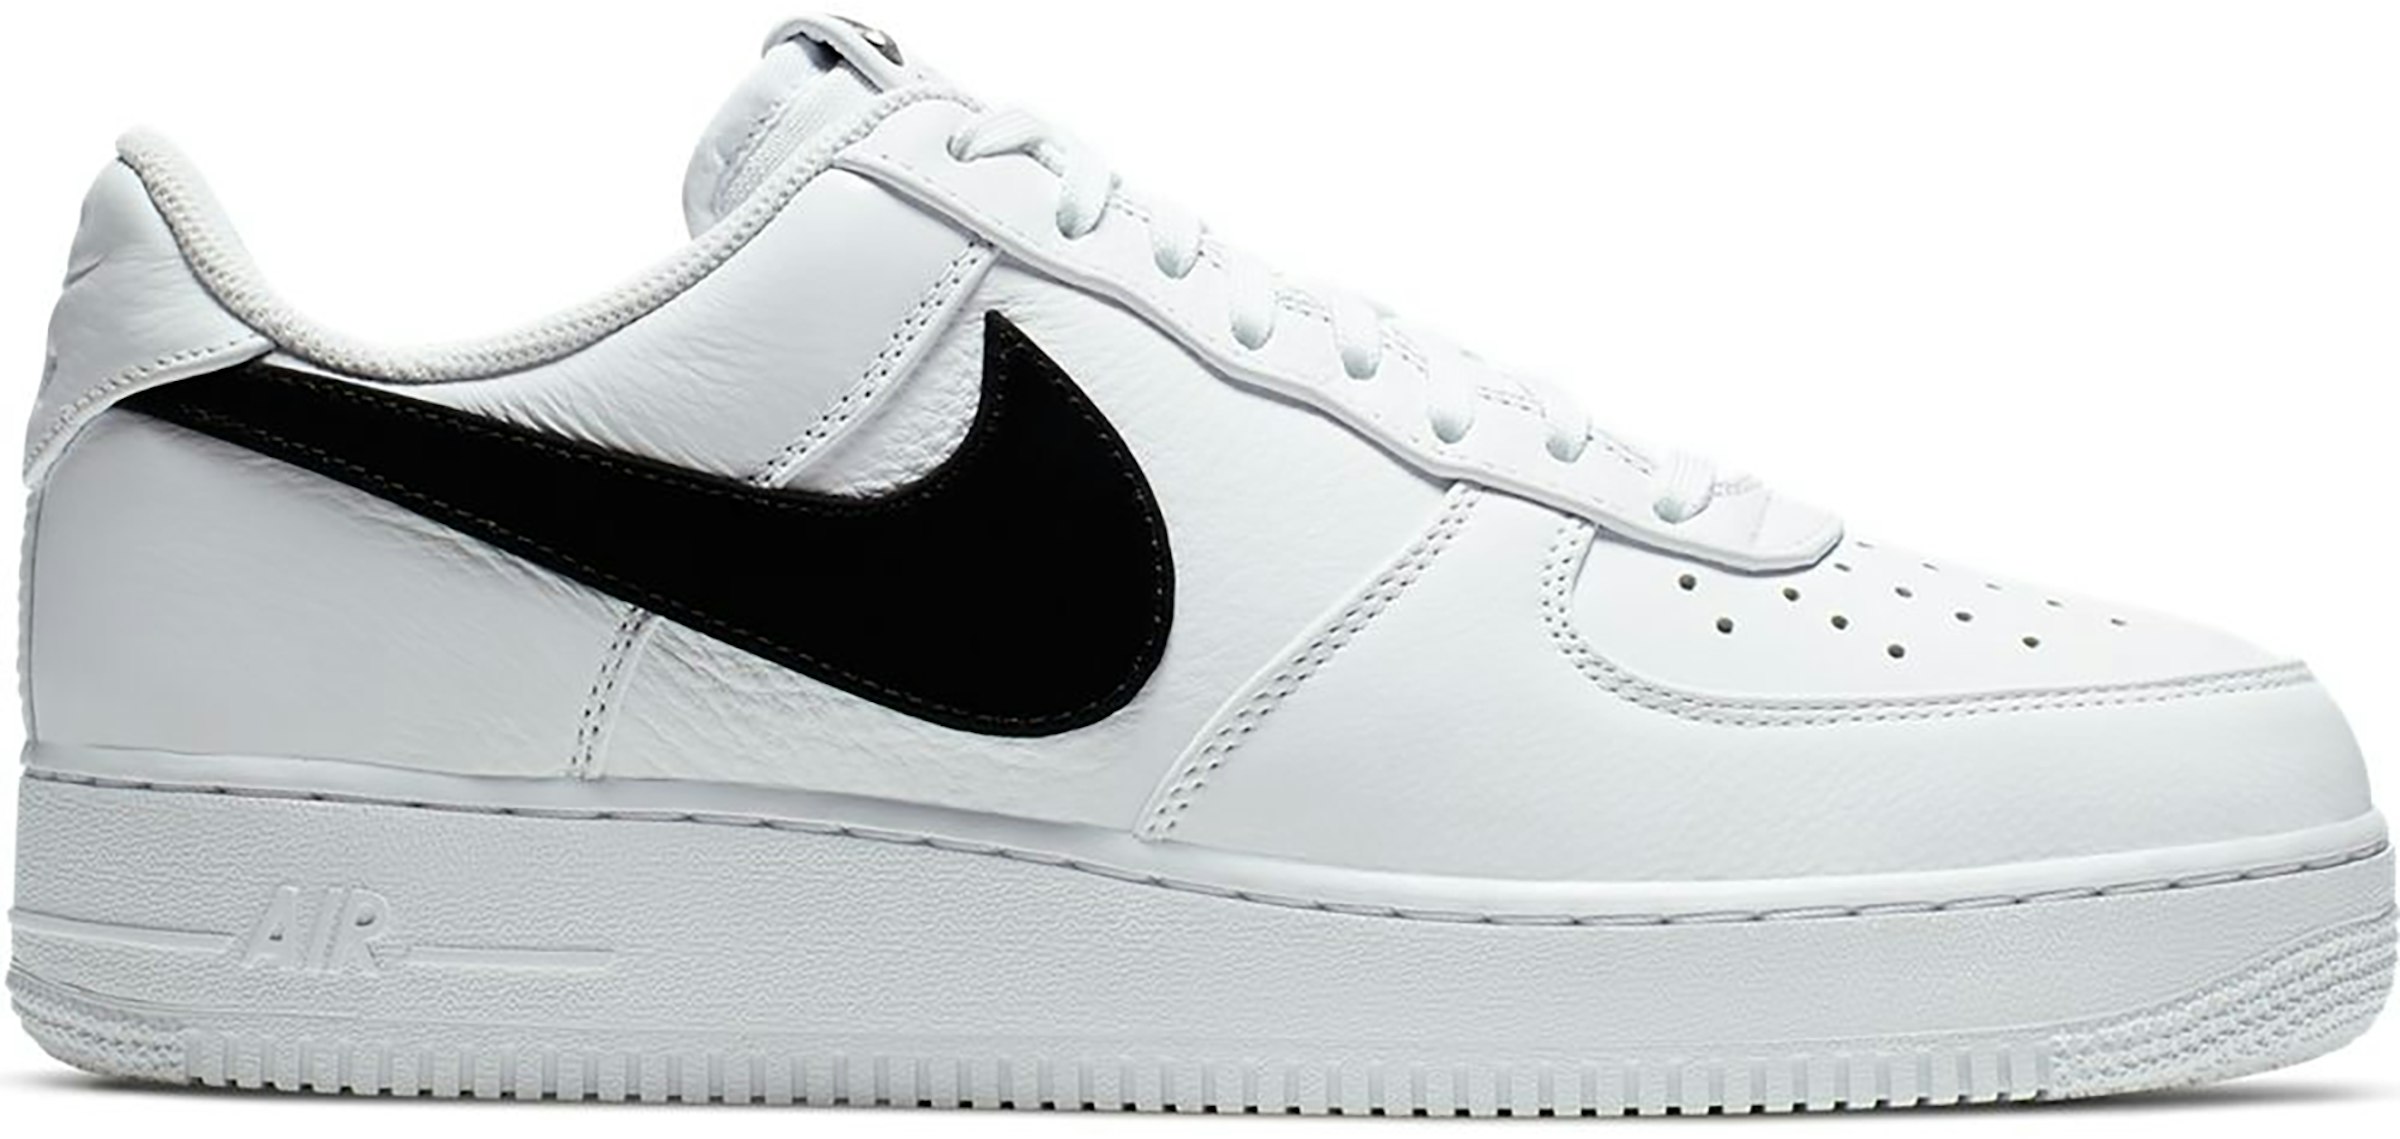 Tact uitroepen schaal Nike Air Force 1 Low Premium 2 White Black Men's - AT4143-102 - GB